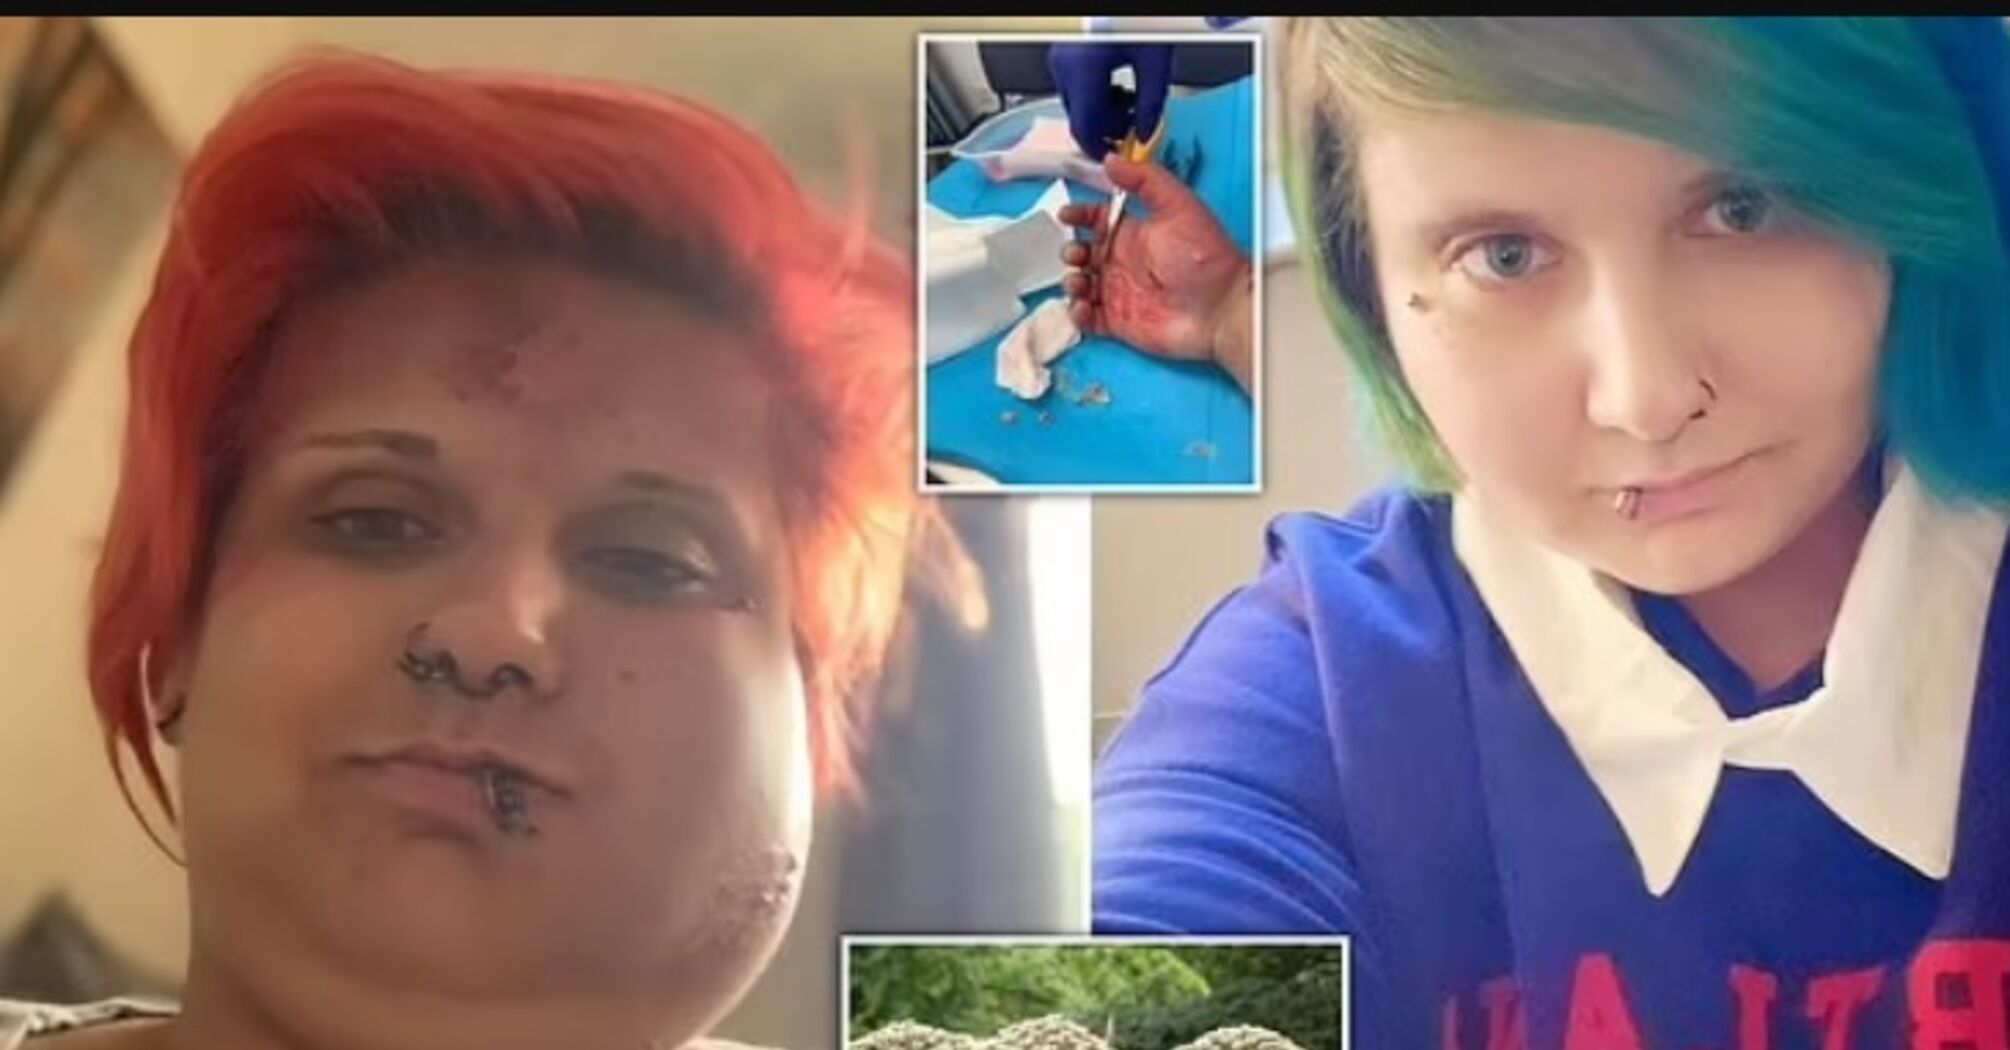 After touching poisonous shrub, a British woman spent a month in the hospital and looked like a Teletubby (photo)